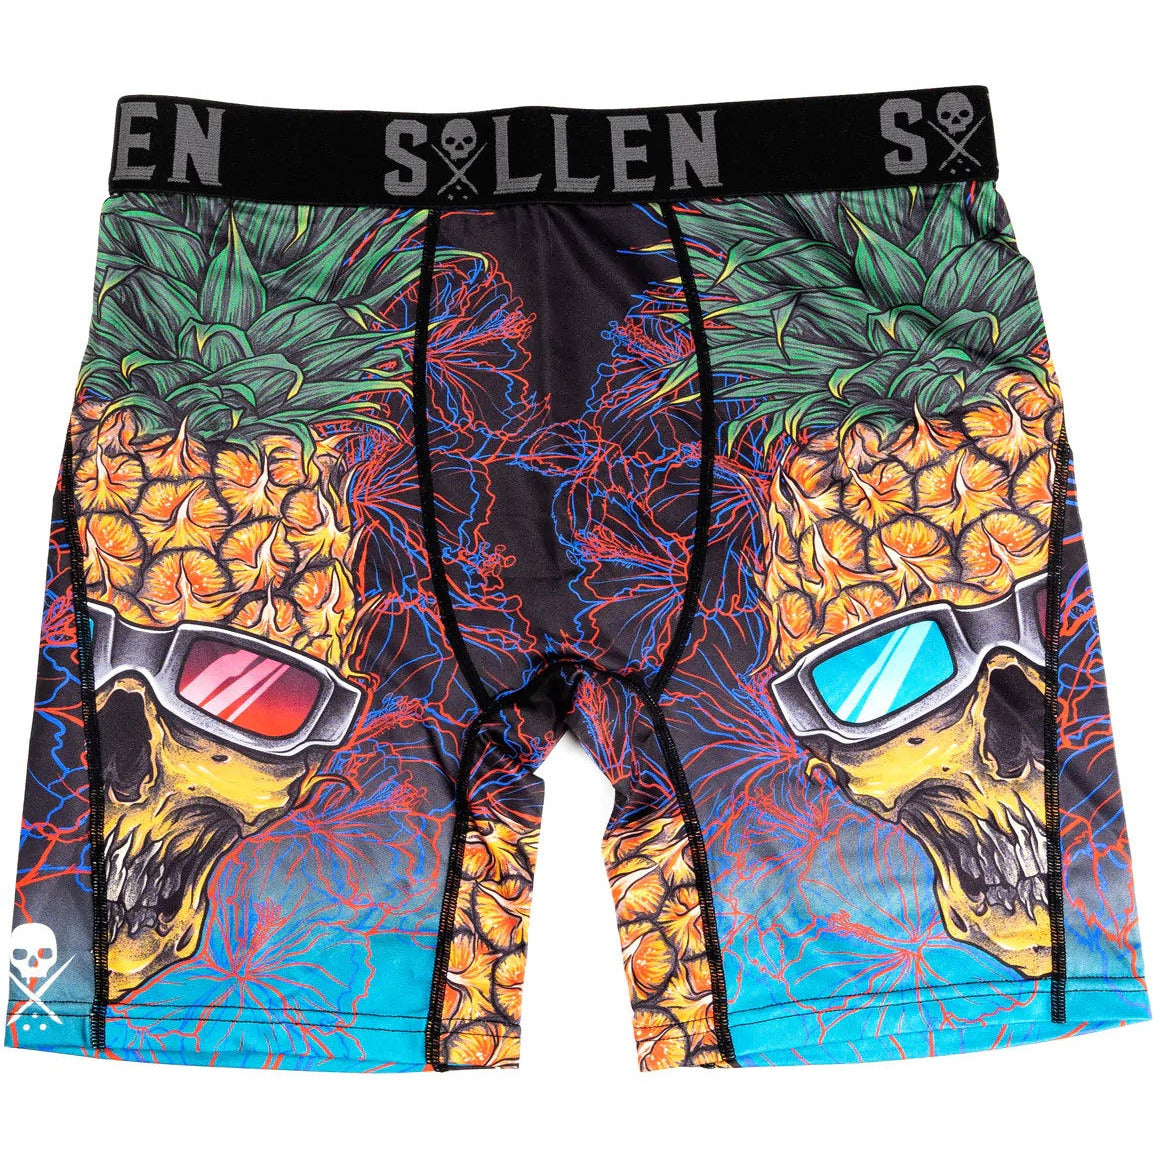 SULLEN-ART-COLLECTIVE-PINESKULL-BOXERS - BOXER - Synik Clothing - synikclothing.com